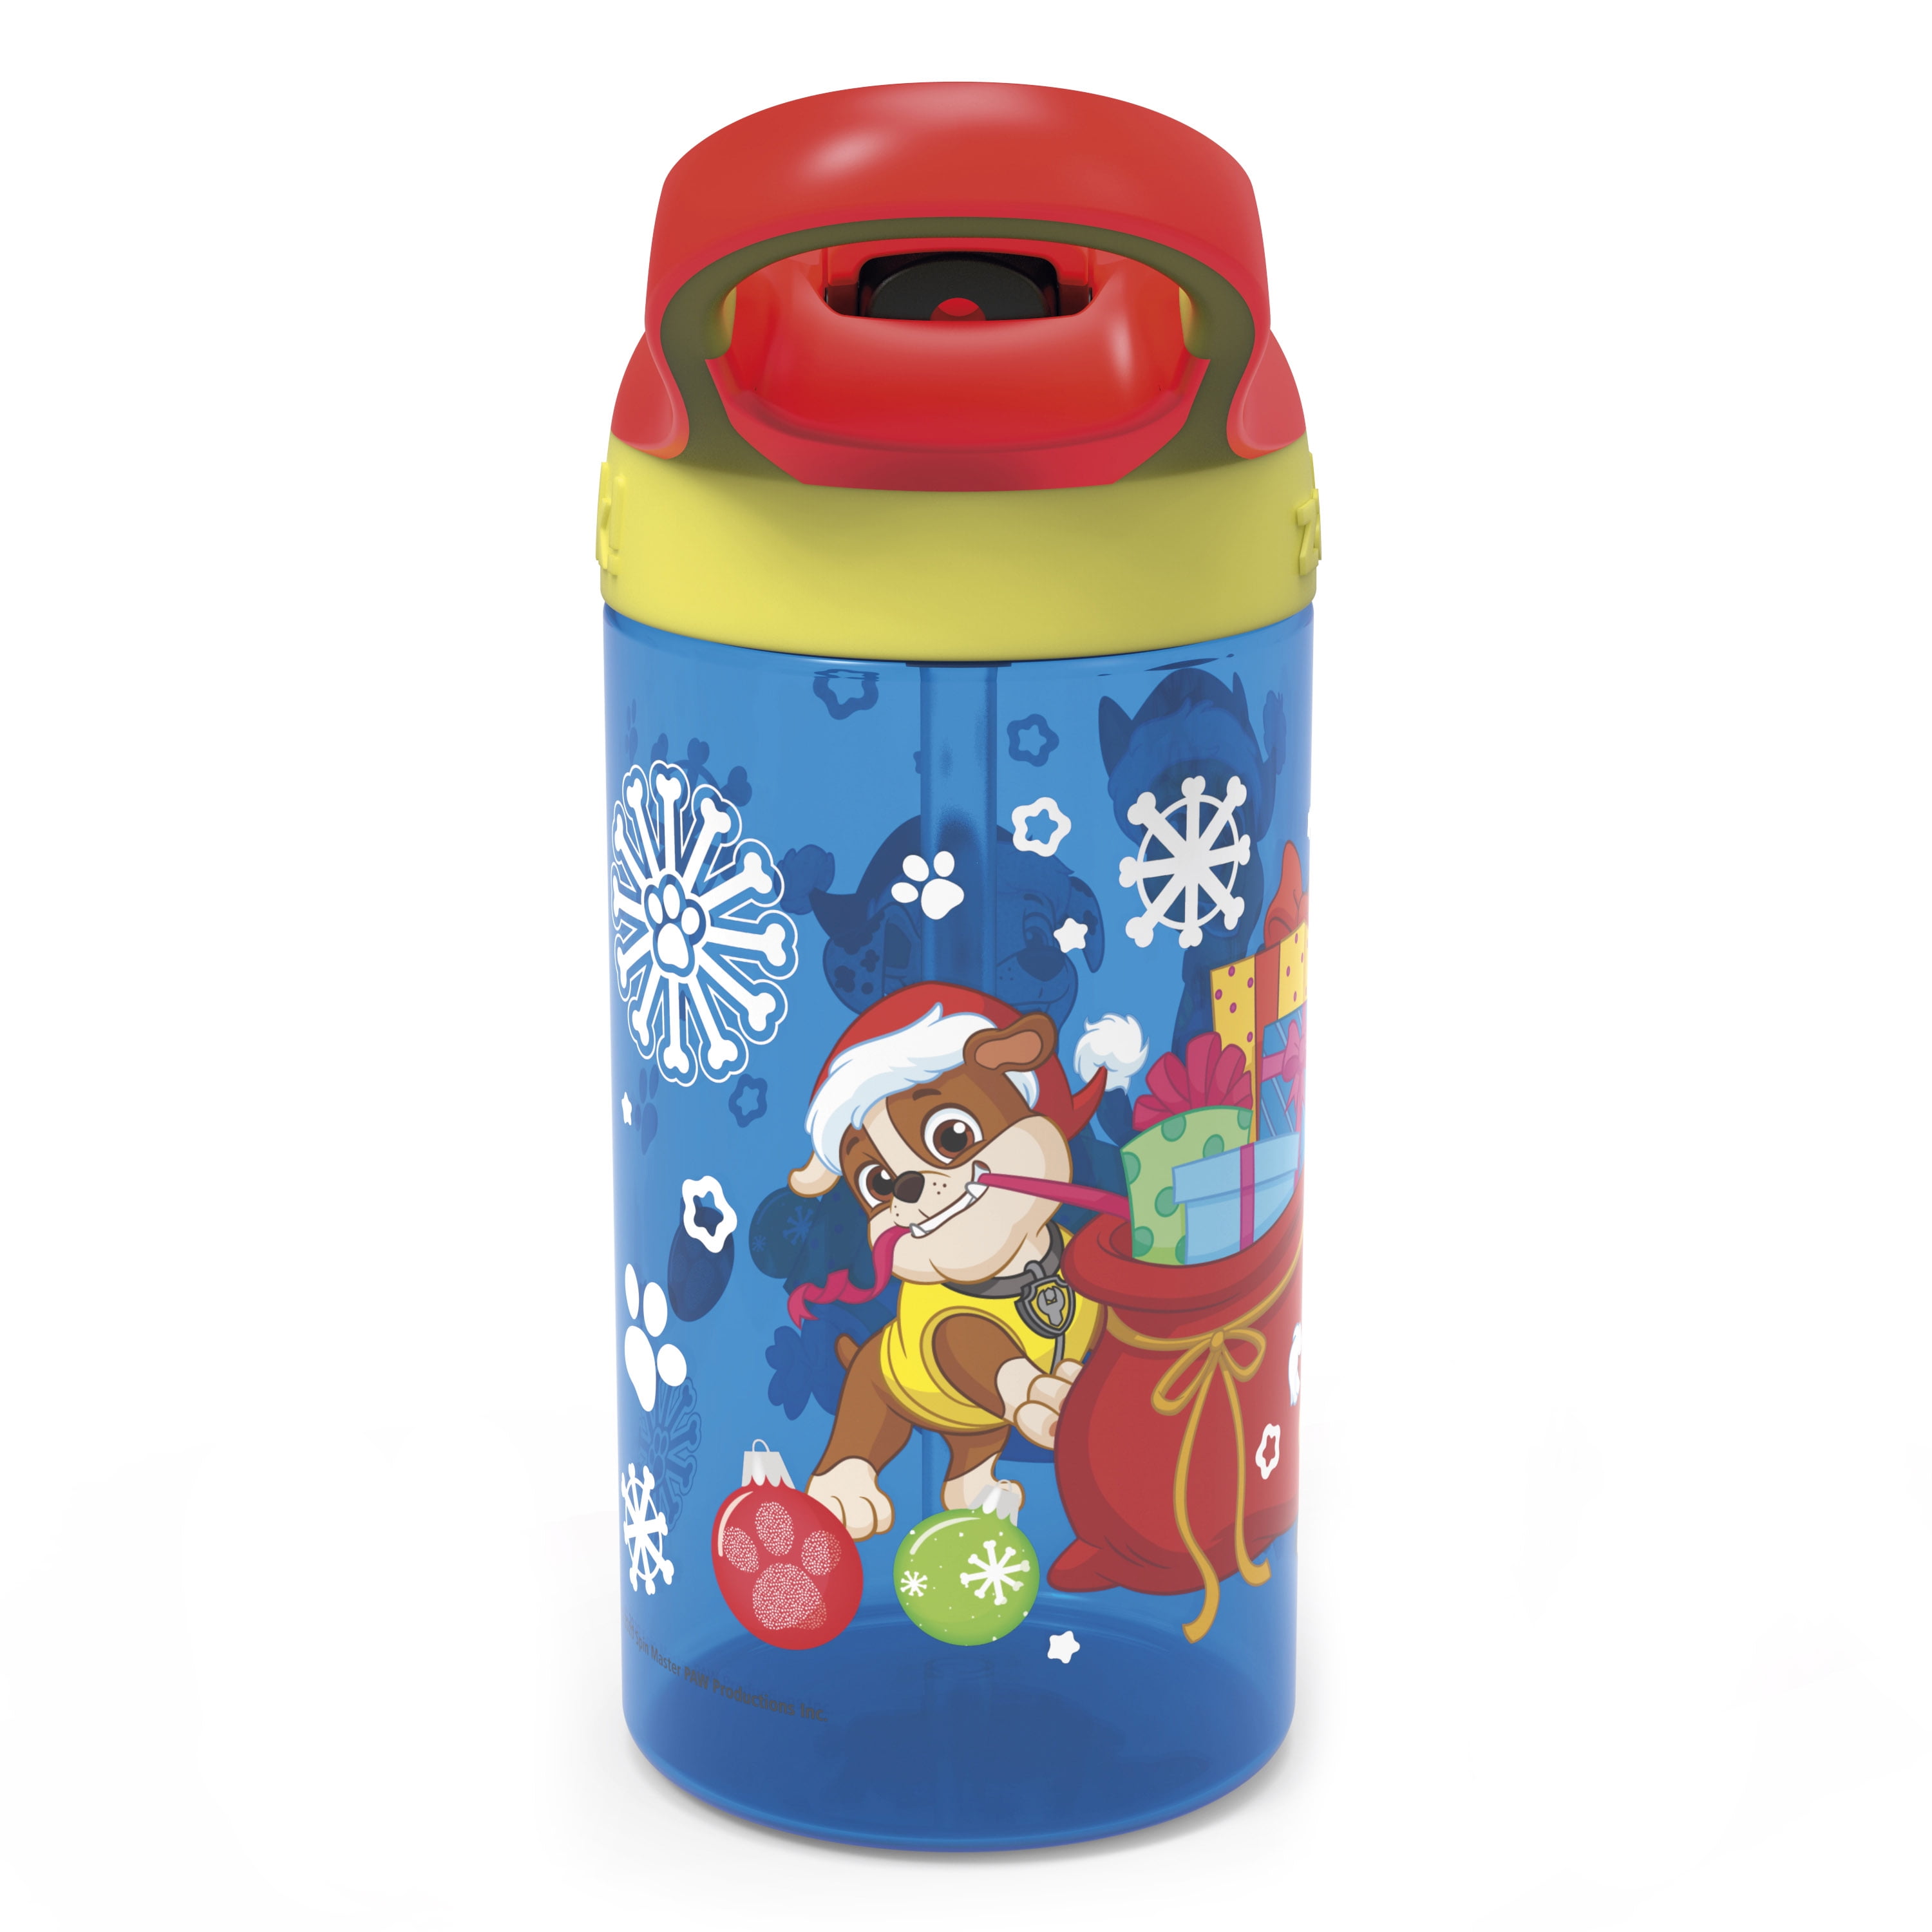 Paw Patrol Beacon 2-Piece Kids Water Bottle Set with Covered Spout, 16 Ounces